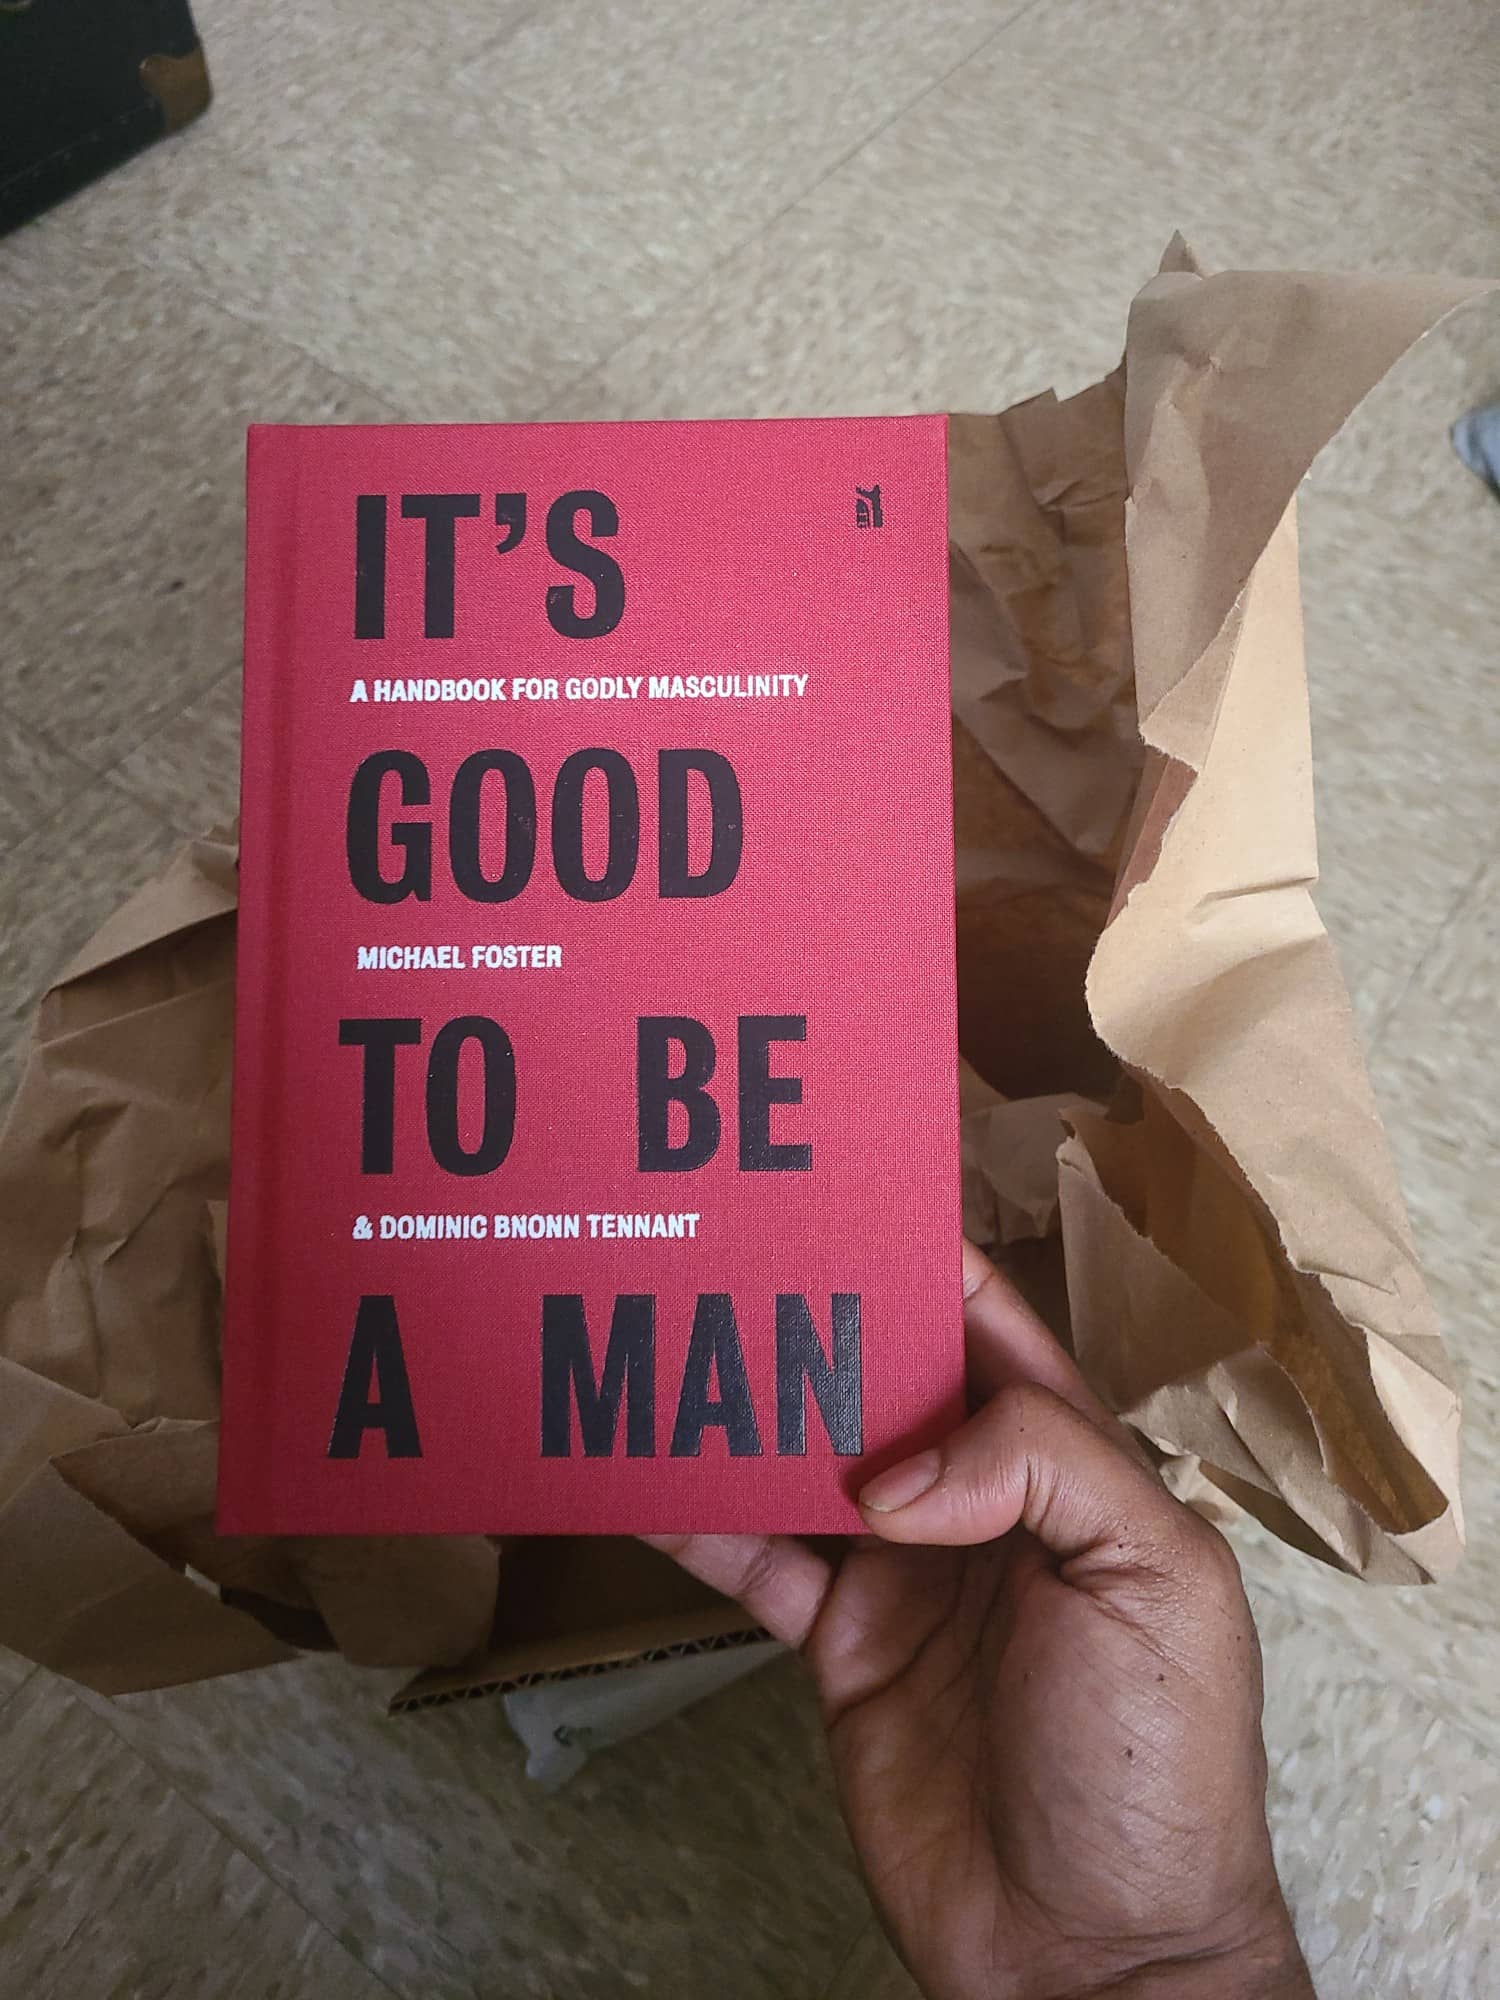 It's Good To Be A Man: A Handbook for Godly Masculinity, by Michael Foster & Dominic Bnonn Tennant